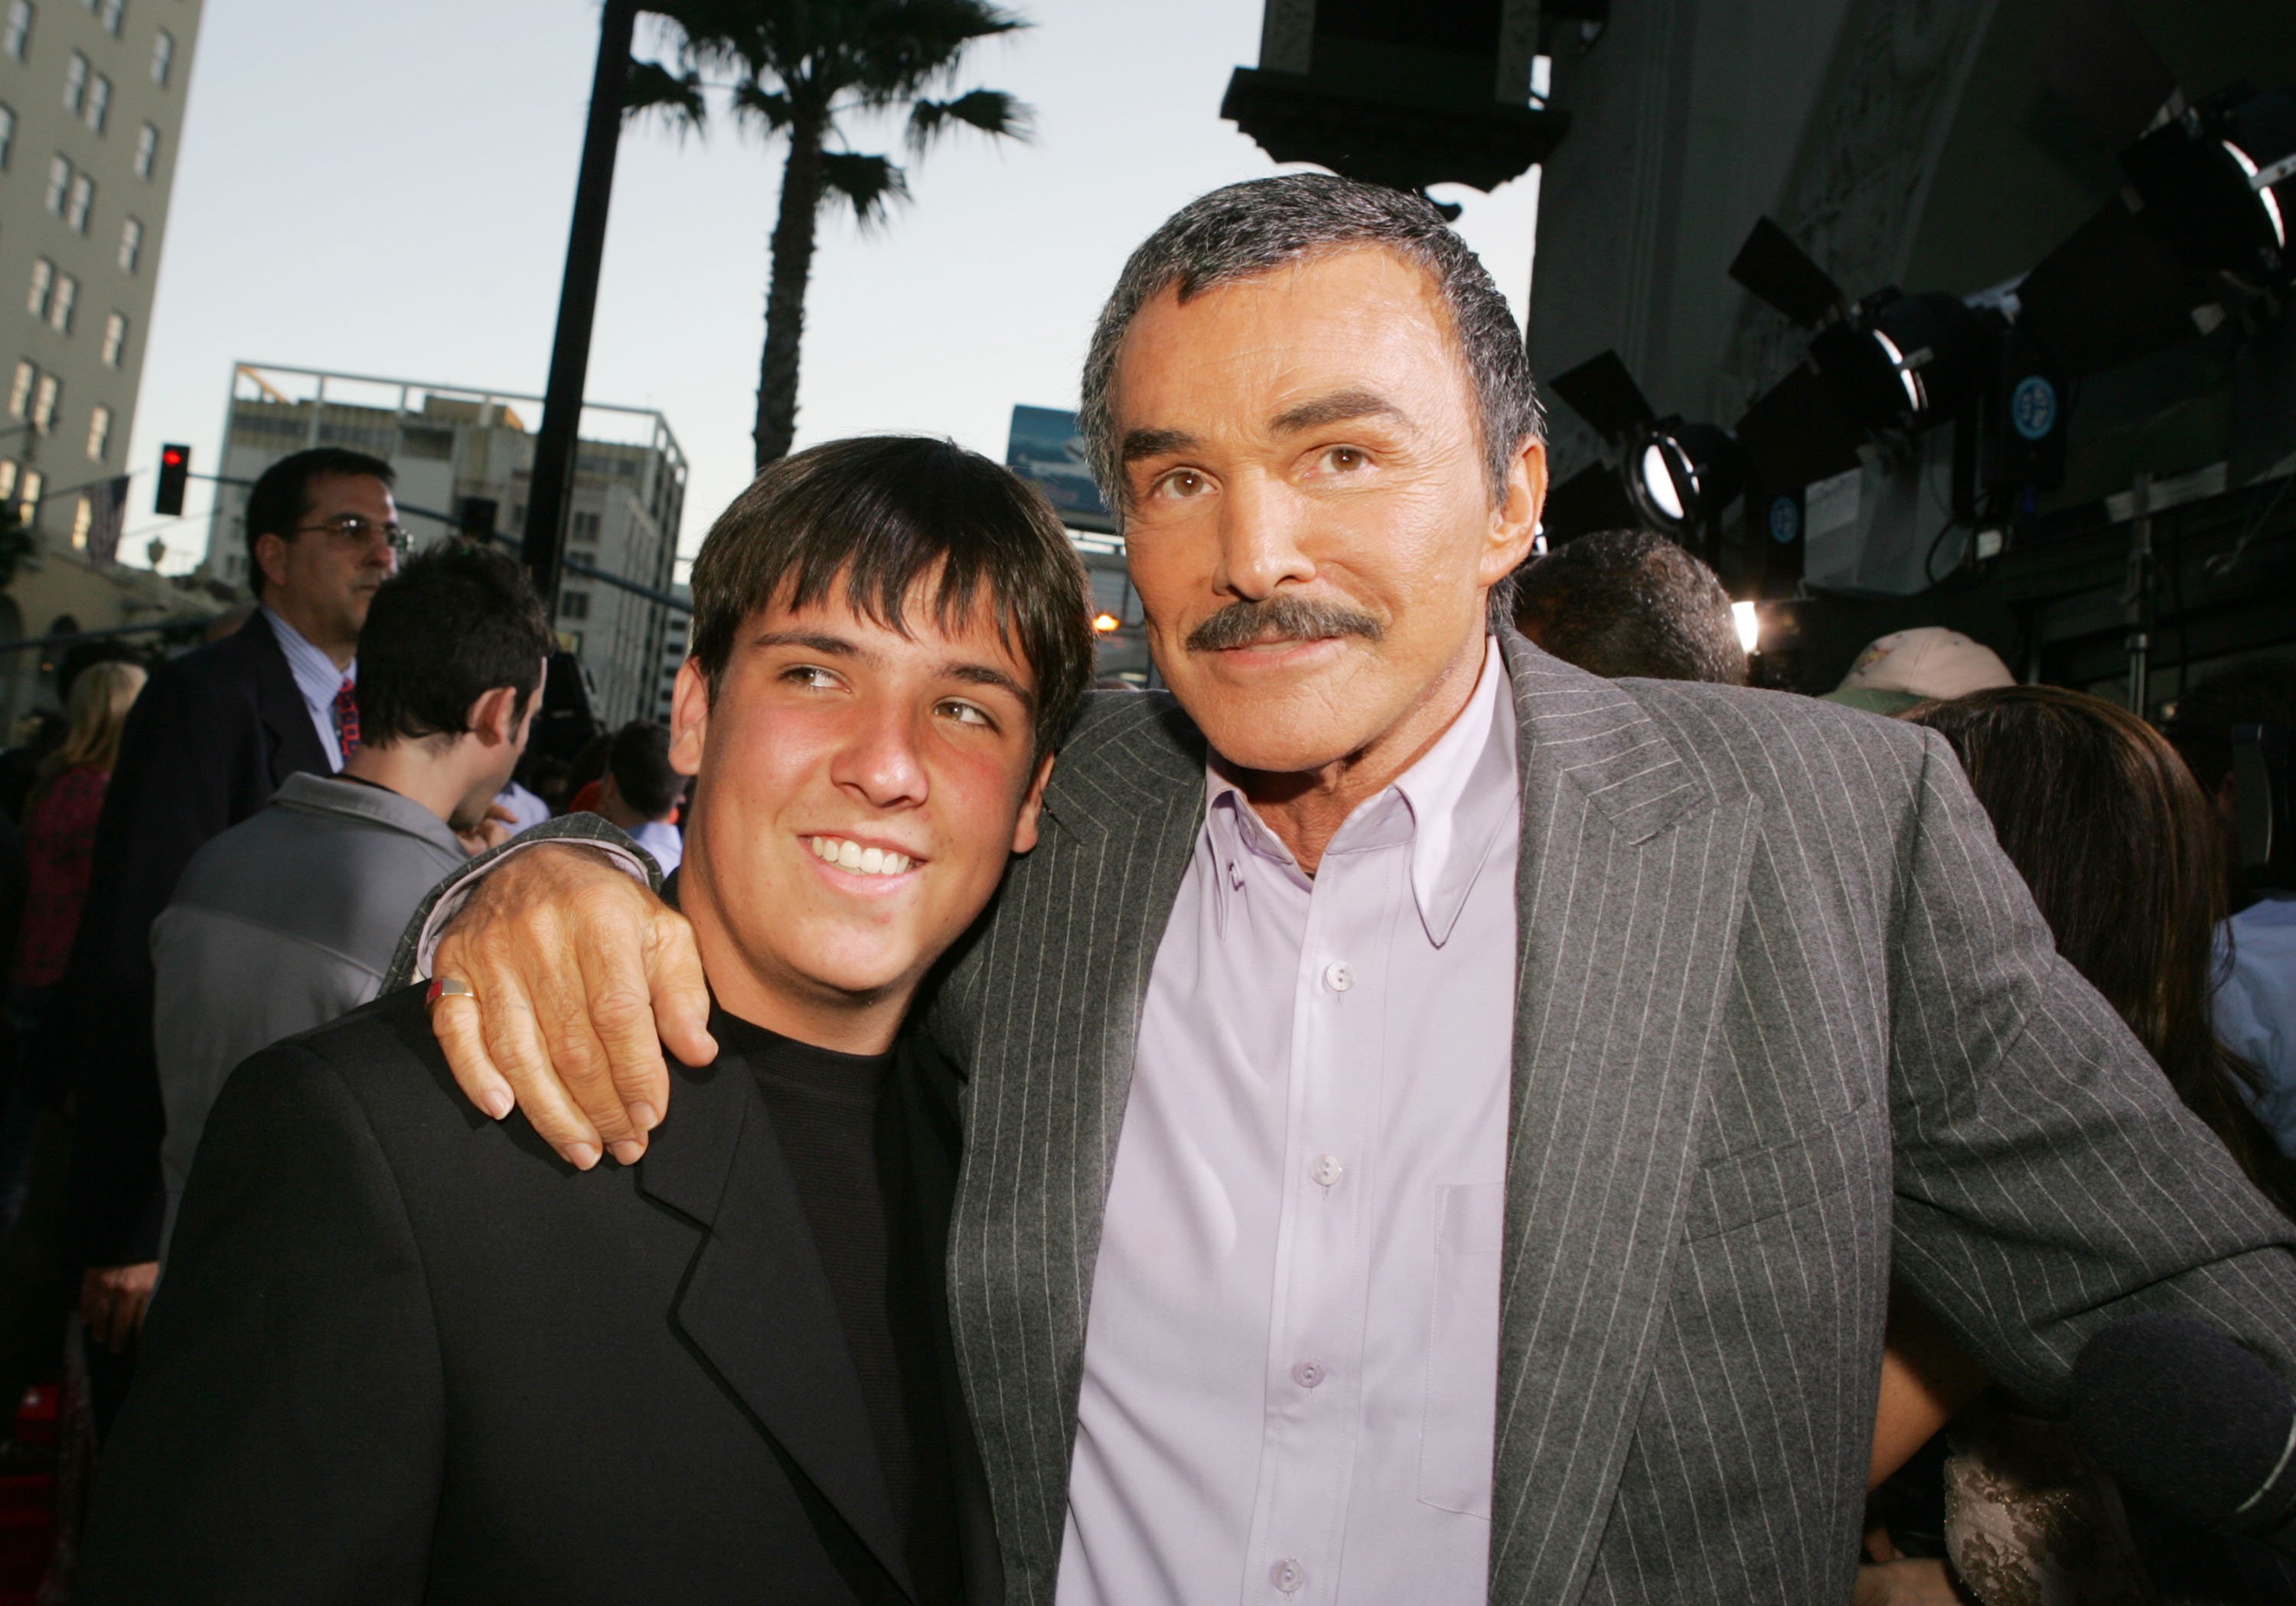 Burt Reynolds and his son Quinton at the premiere of Paramount Pictures' "The Longest Yard," 2005, Los Angeles, California. | Photo: Getty Images